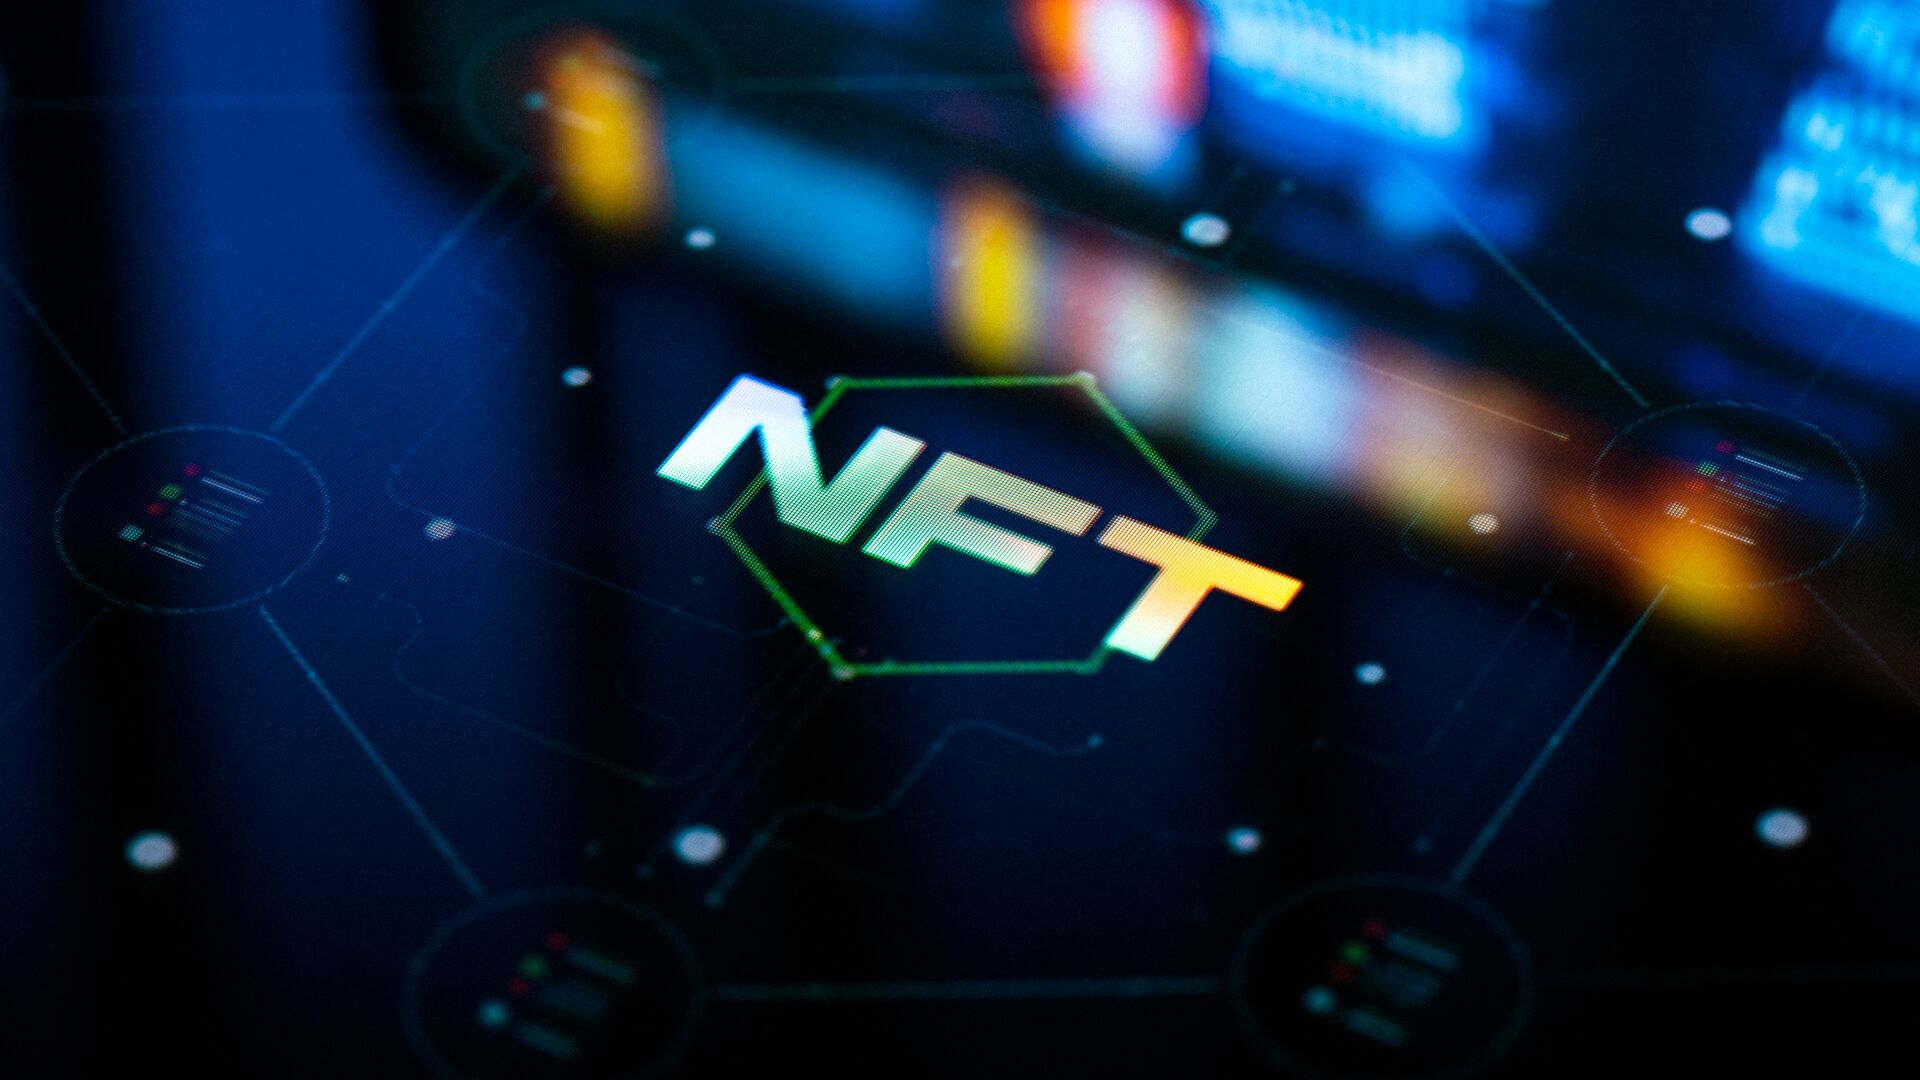 Concept for NFTs in the retail space. Brook Armstrong, CEO of Blockskye provides a deep dive into NFTs, cryptocurrencies, intellectual property risks, and the metaverse.